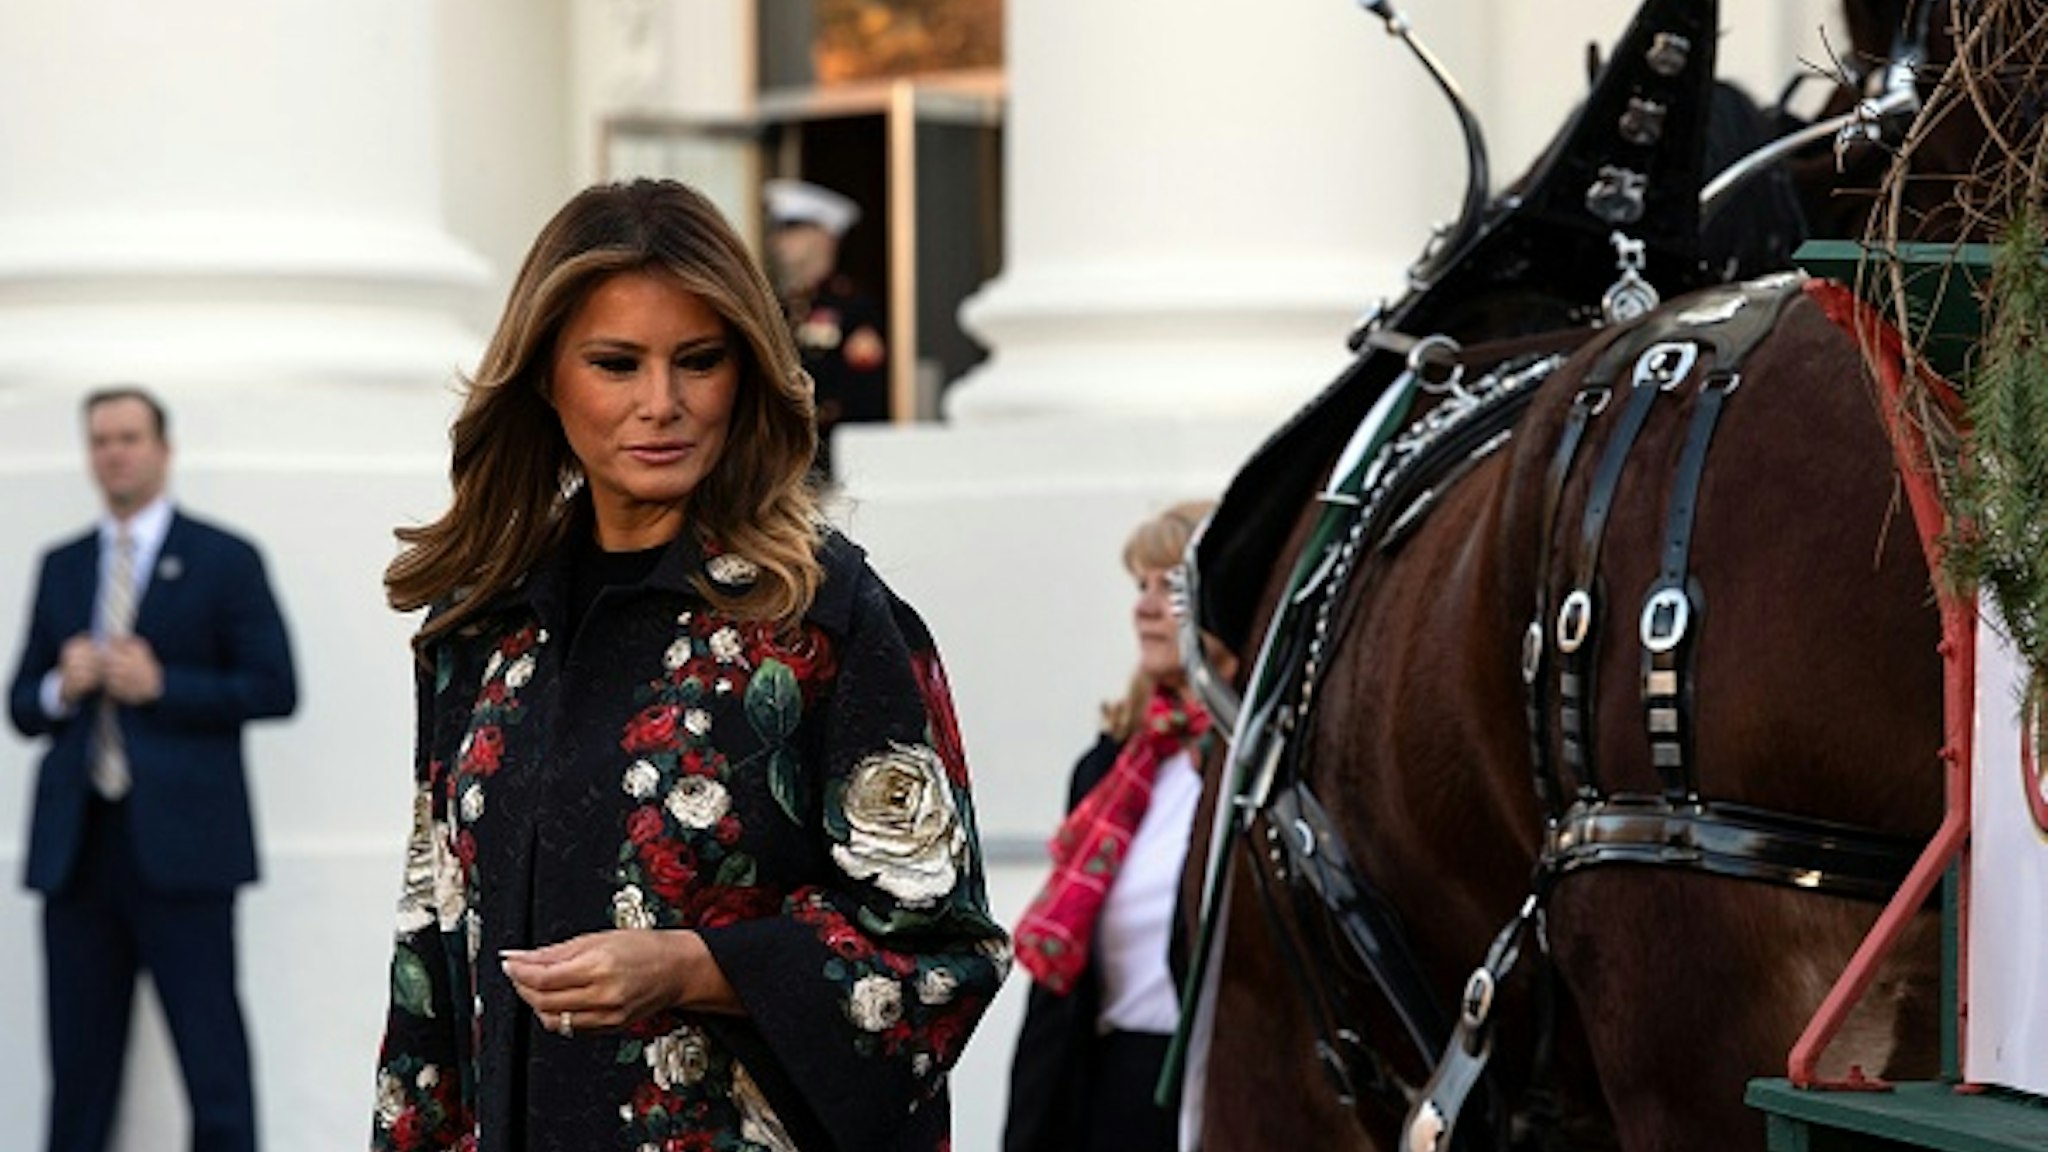 US First Lady Melania Trump receives the White House Christmas tree at the White House in Washington, DC, on November 25, 2019.